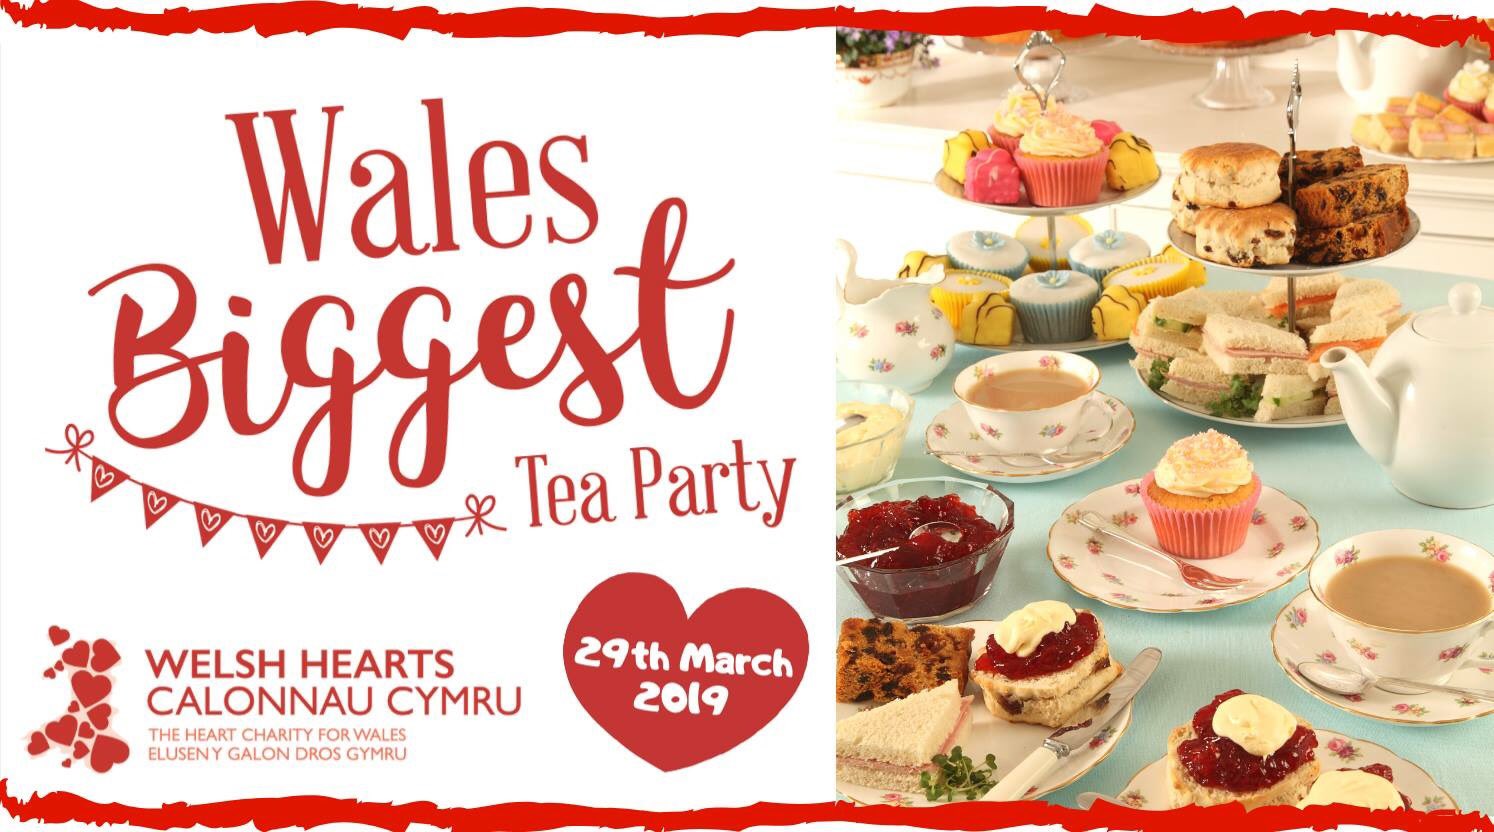 Welsh Hearts Tea Party At The Business Centre (Cardiff) Ltd Barry